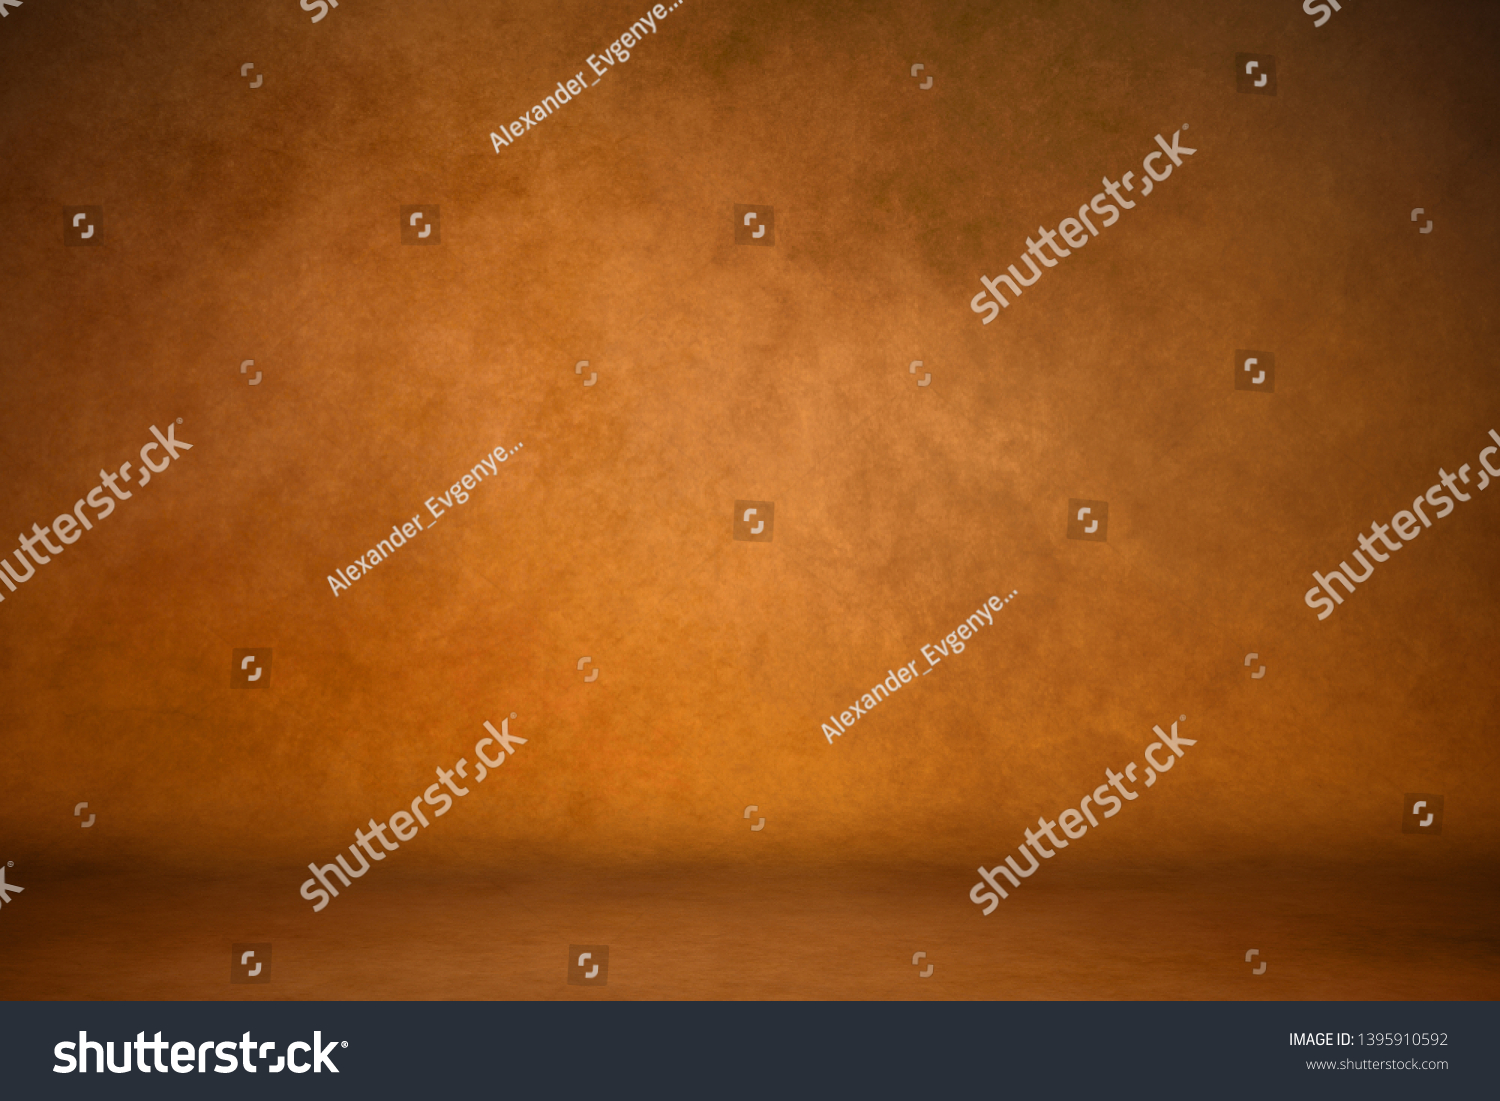 Background studio portrait backdrops brown canvas background on the wall and on the floor with a soft transition. #1395910592